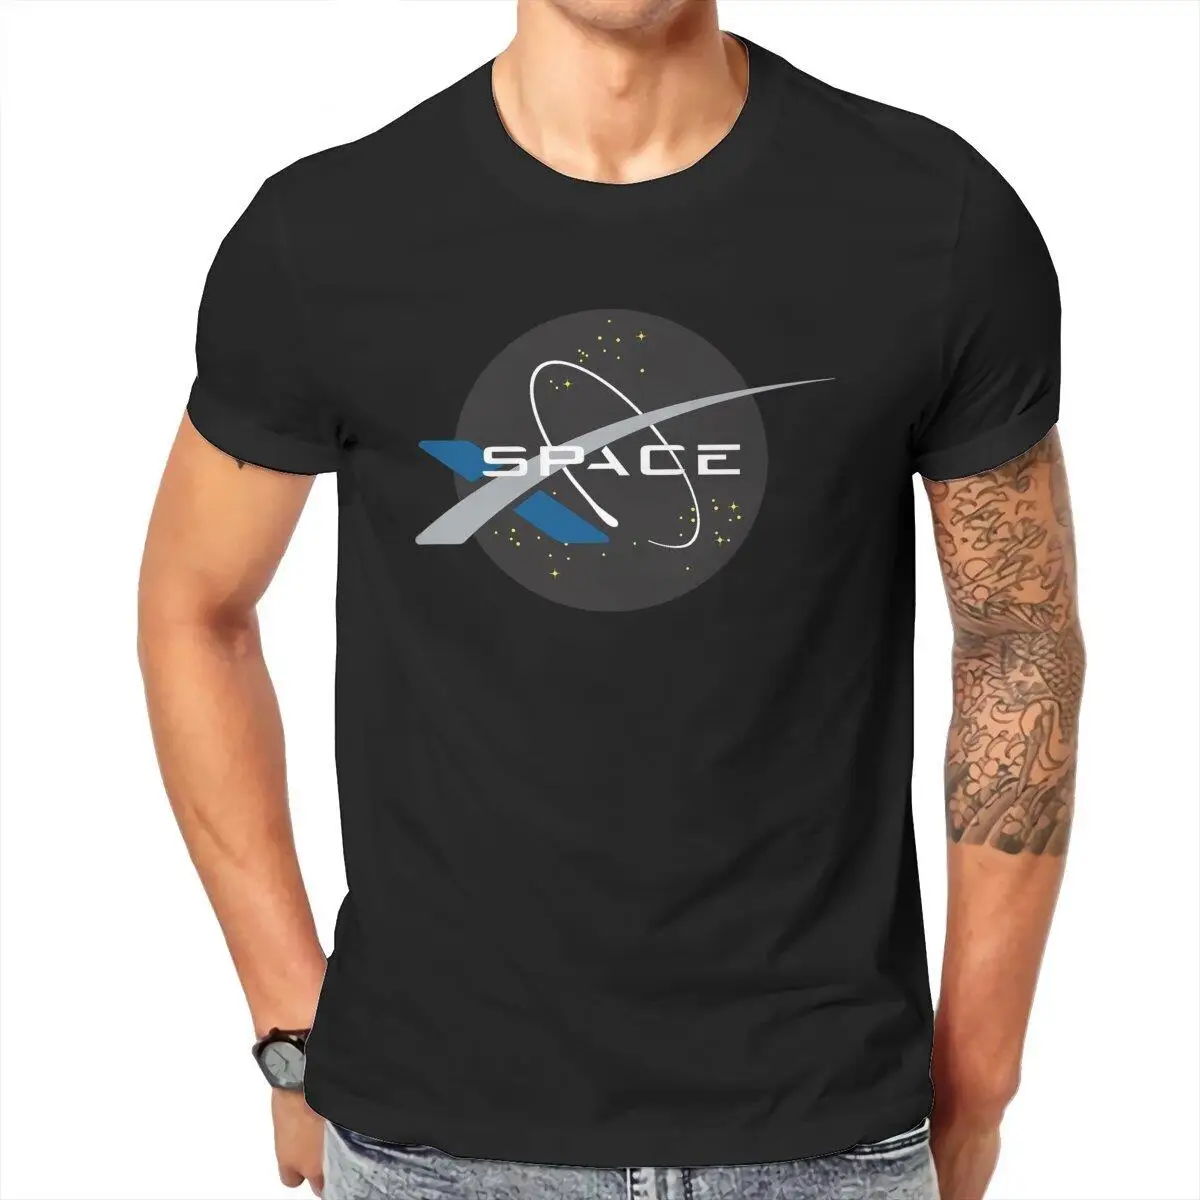 Spacex Space Mars Moon  Men T Shirts  Leisure Tees Short Sleeve Crewneck T-Shirt Cotton Gift Clothes